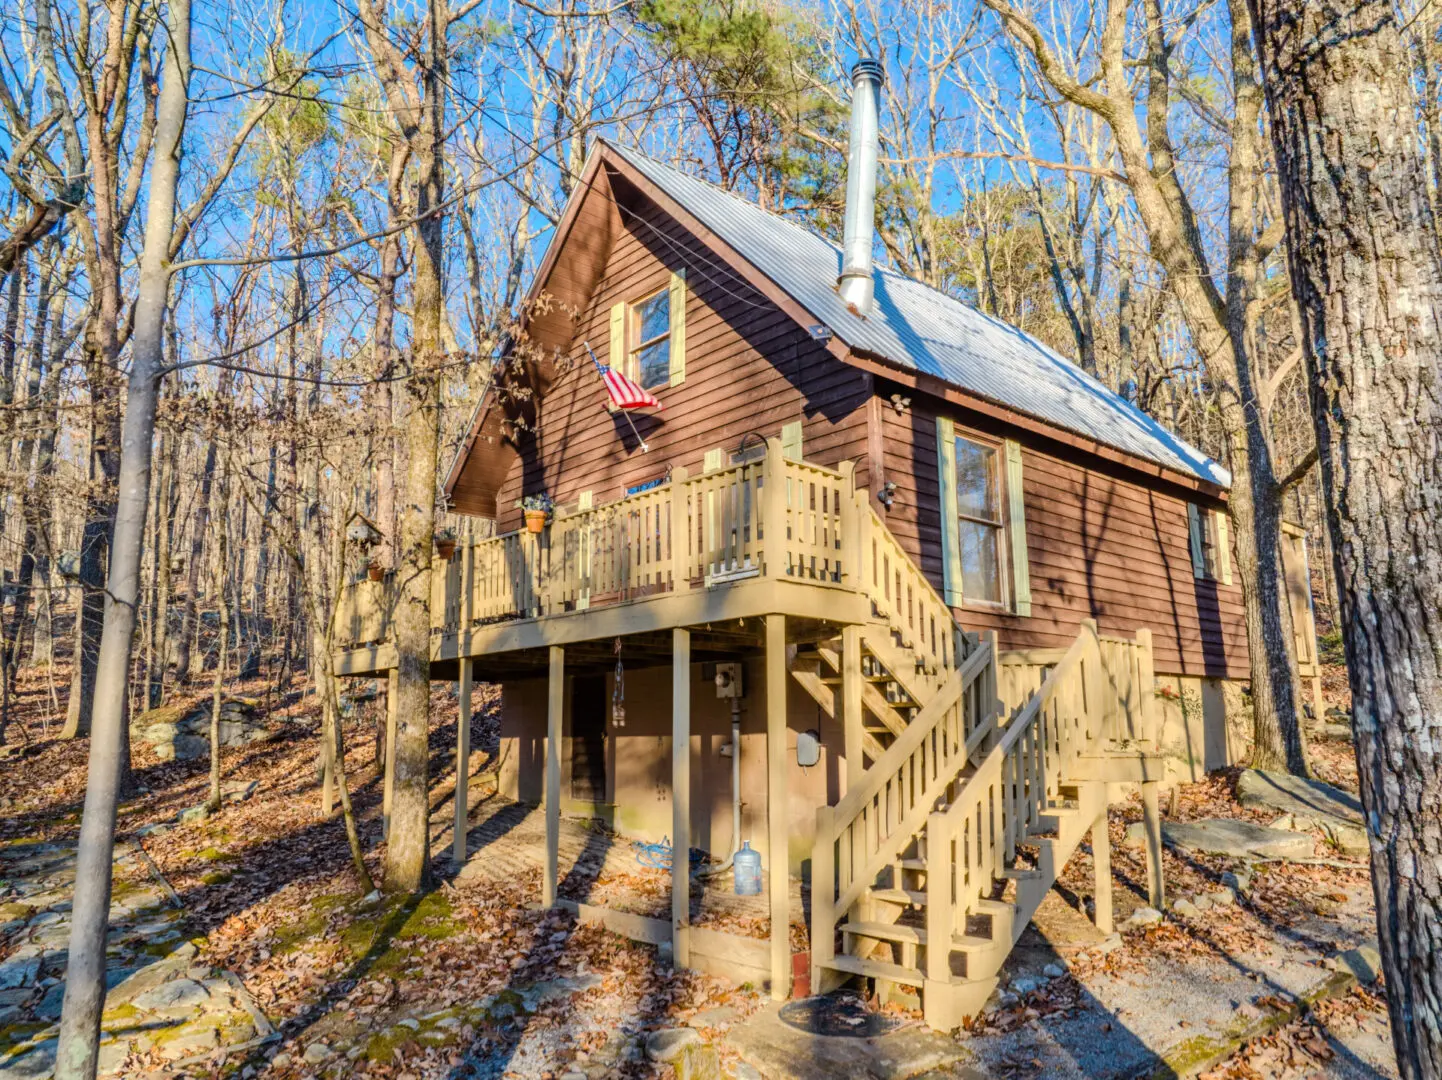 A serene vacation cabin nestled in the peaceful woods, accessible via charming stairs.